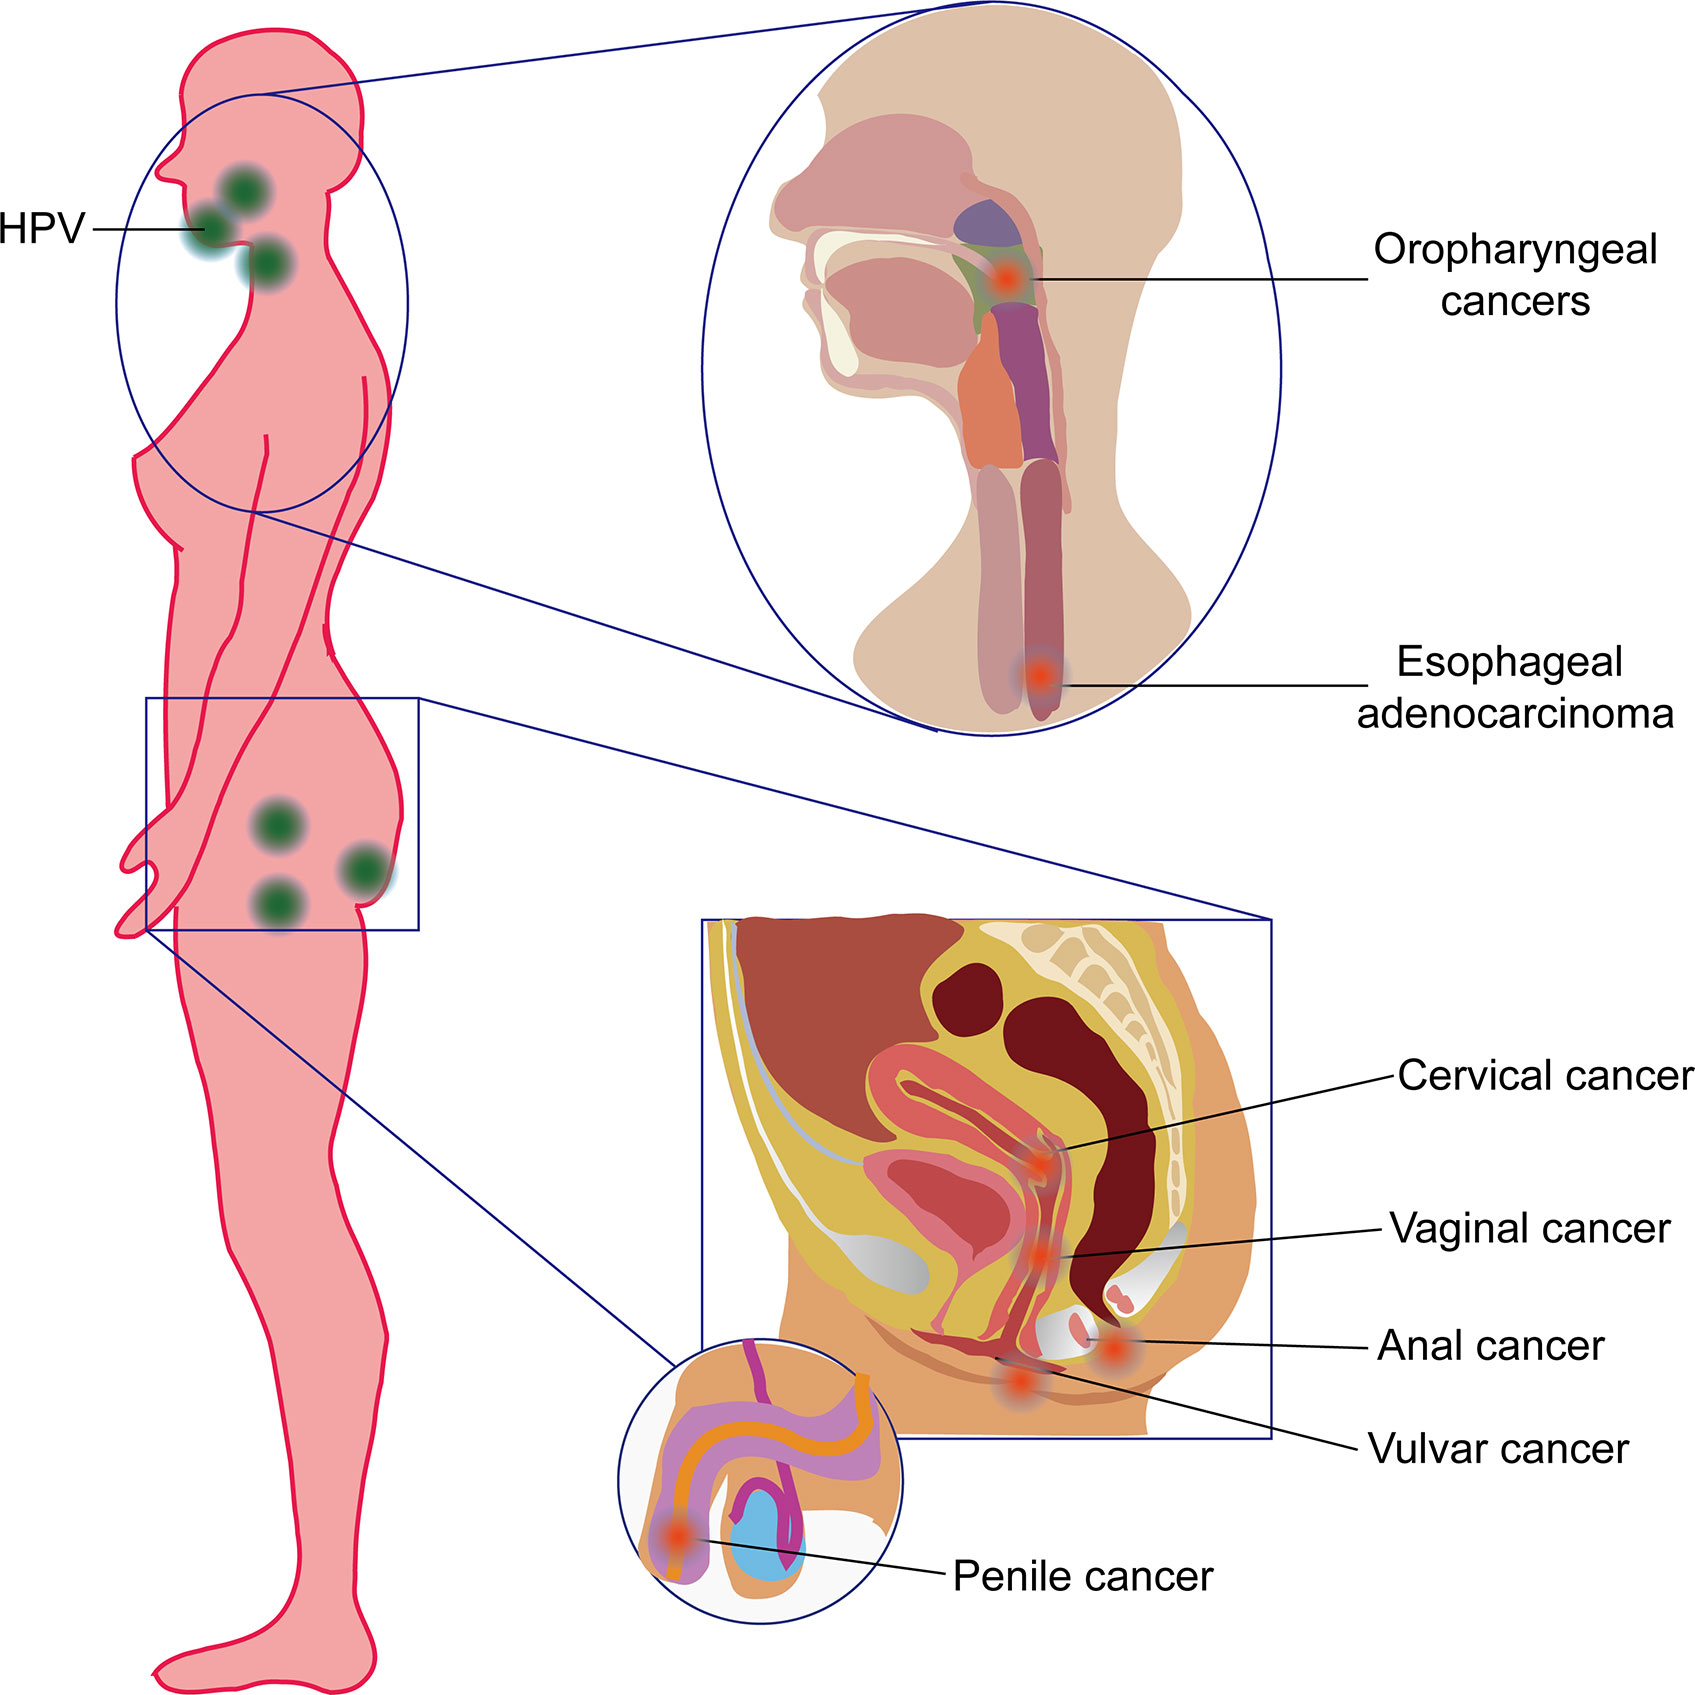 Hpv and esophageal cancer. Esophageal cancer caused by hpv